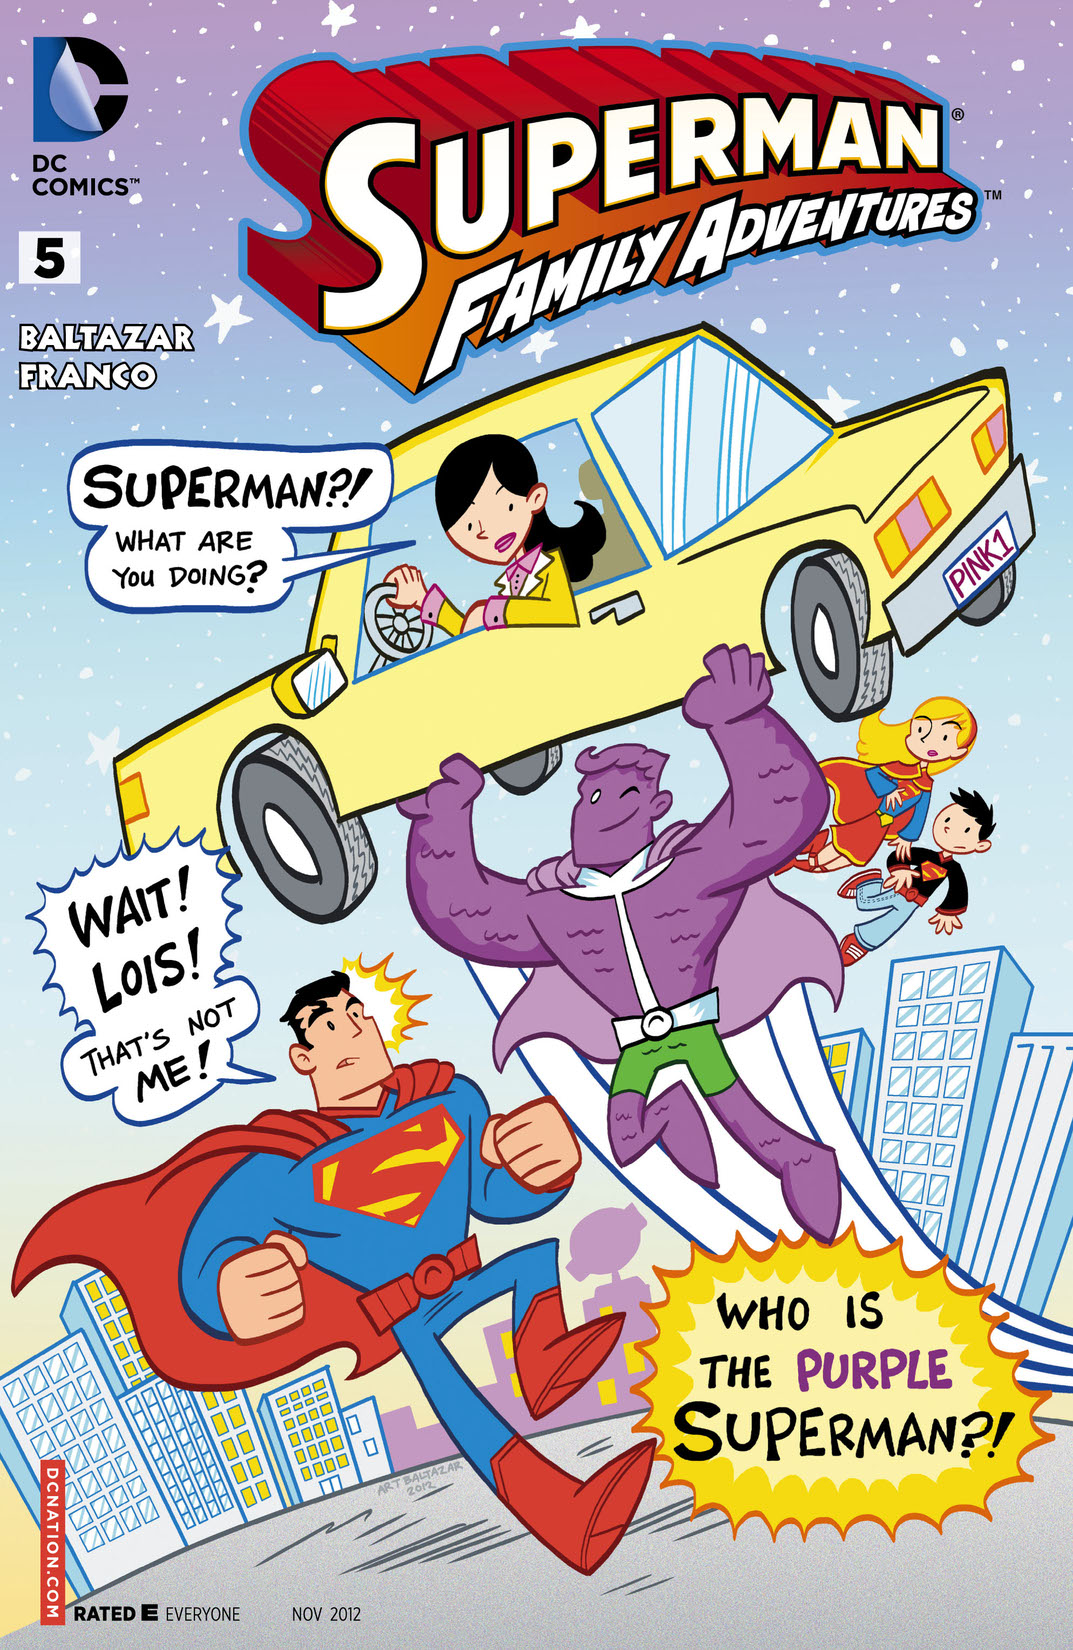 Superman Family Adventures #5 preview images